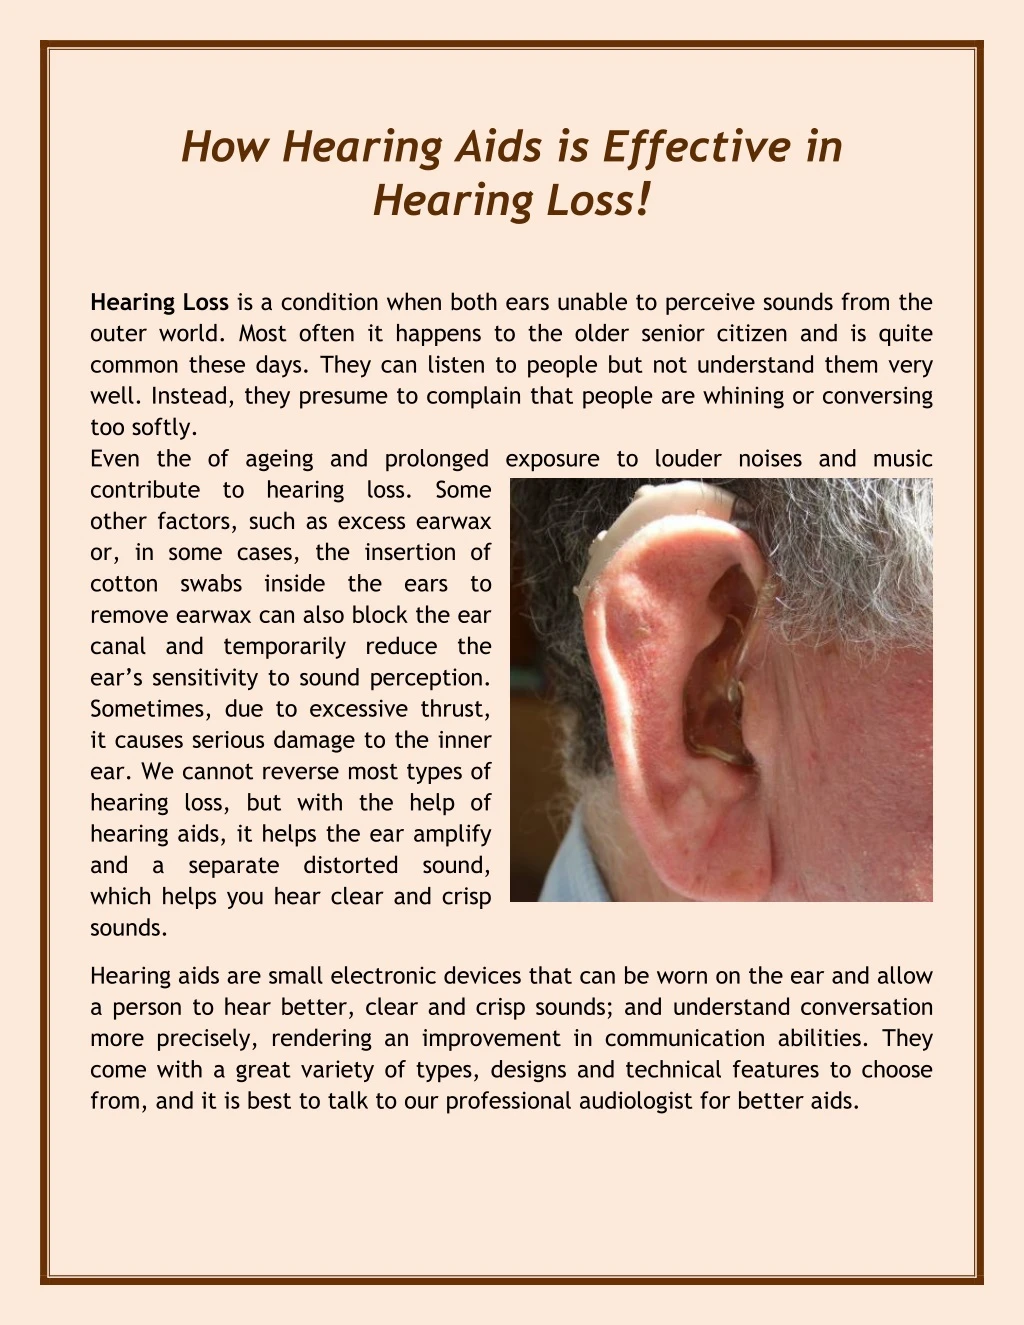 how hearing aids is effective in hearing loss